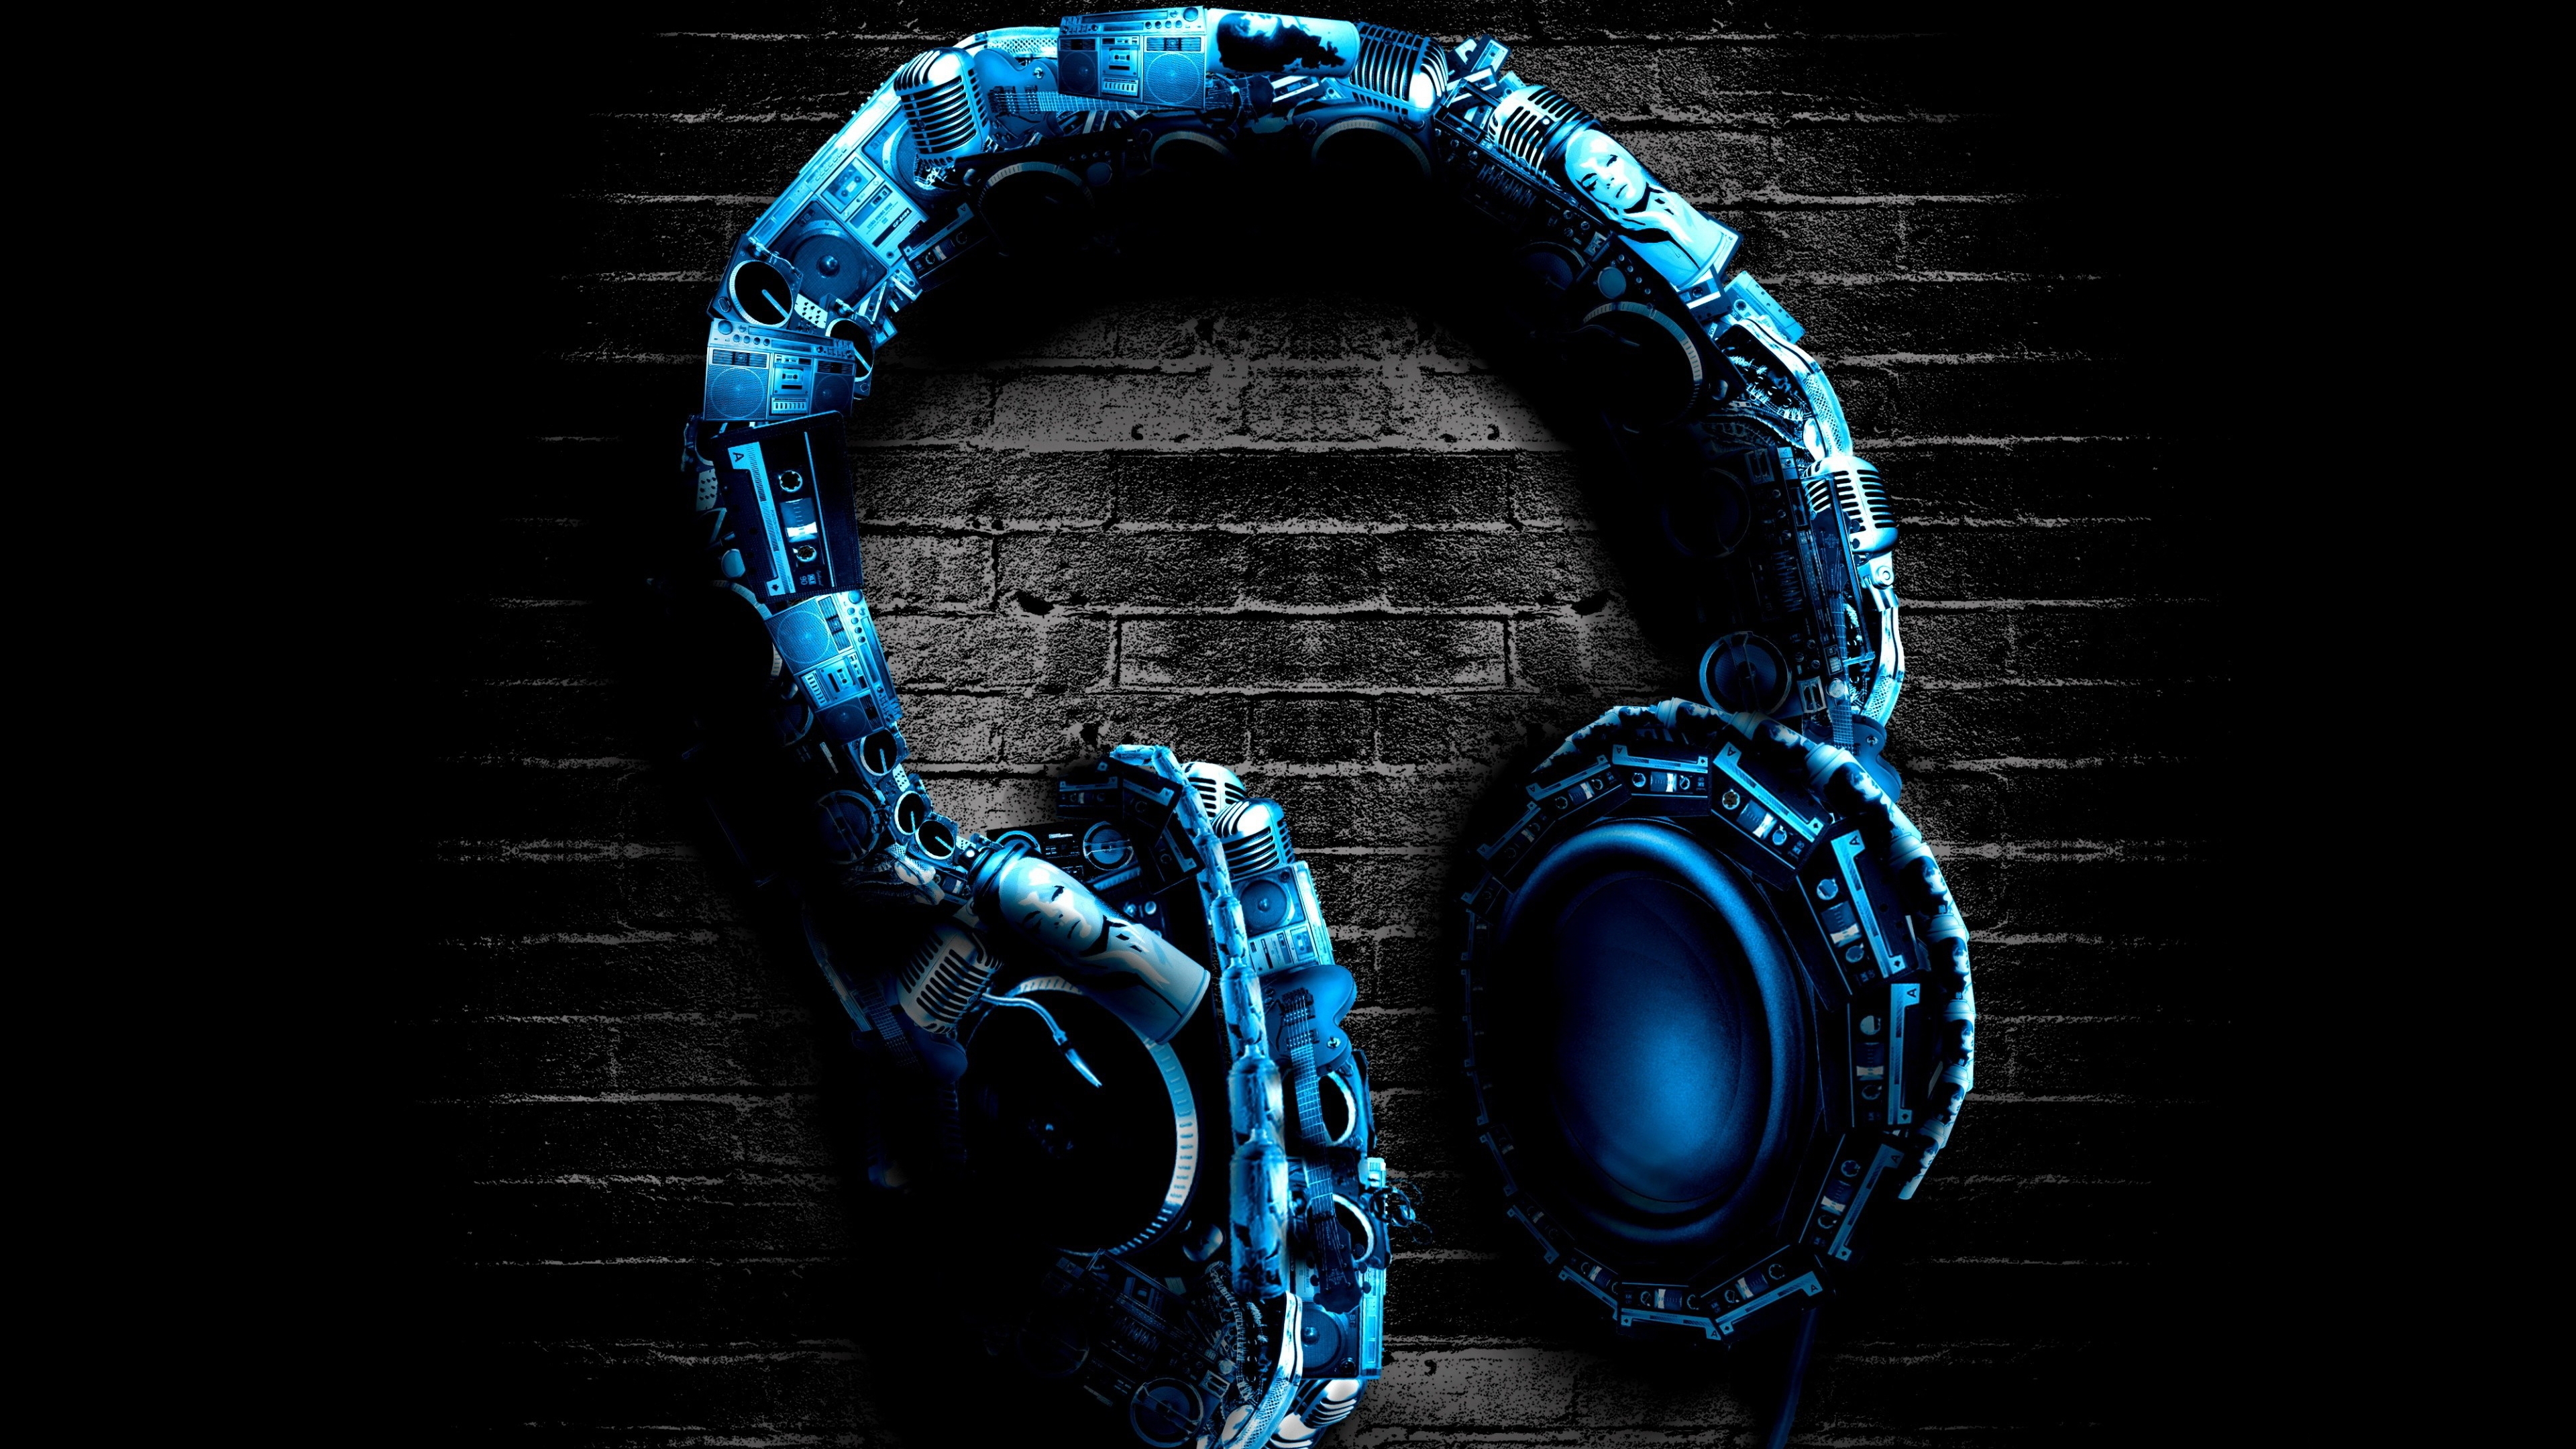 Abstract Headphones for 3840 x 2160 Ultra HD resolution